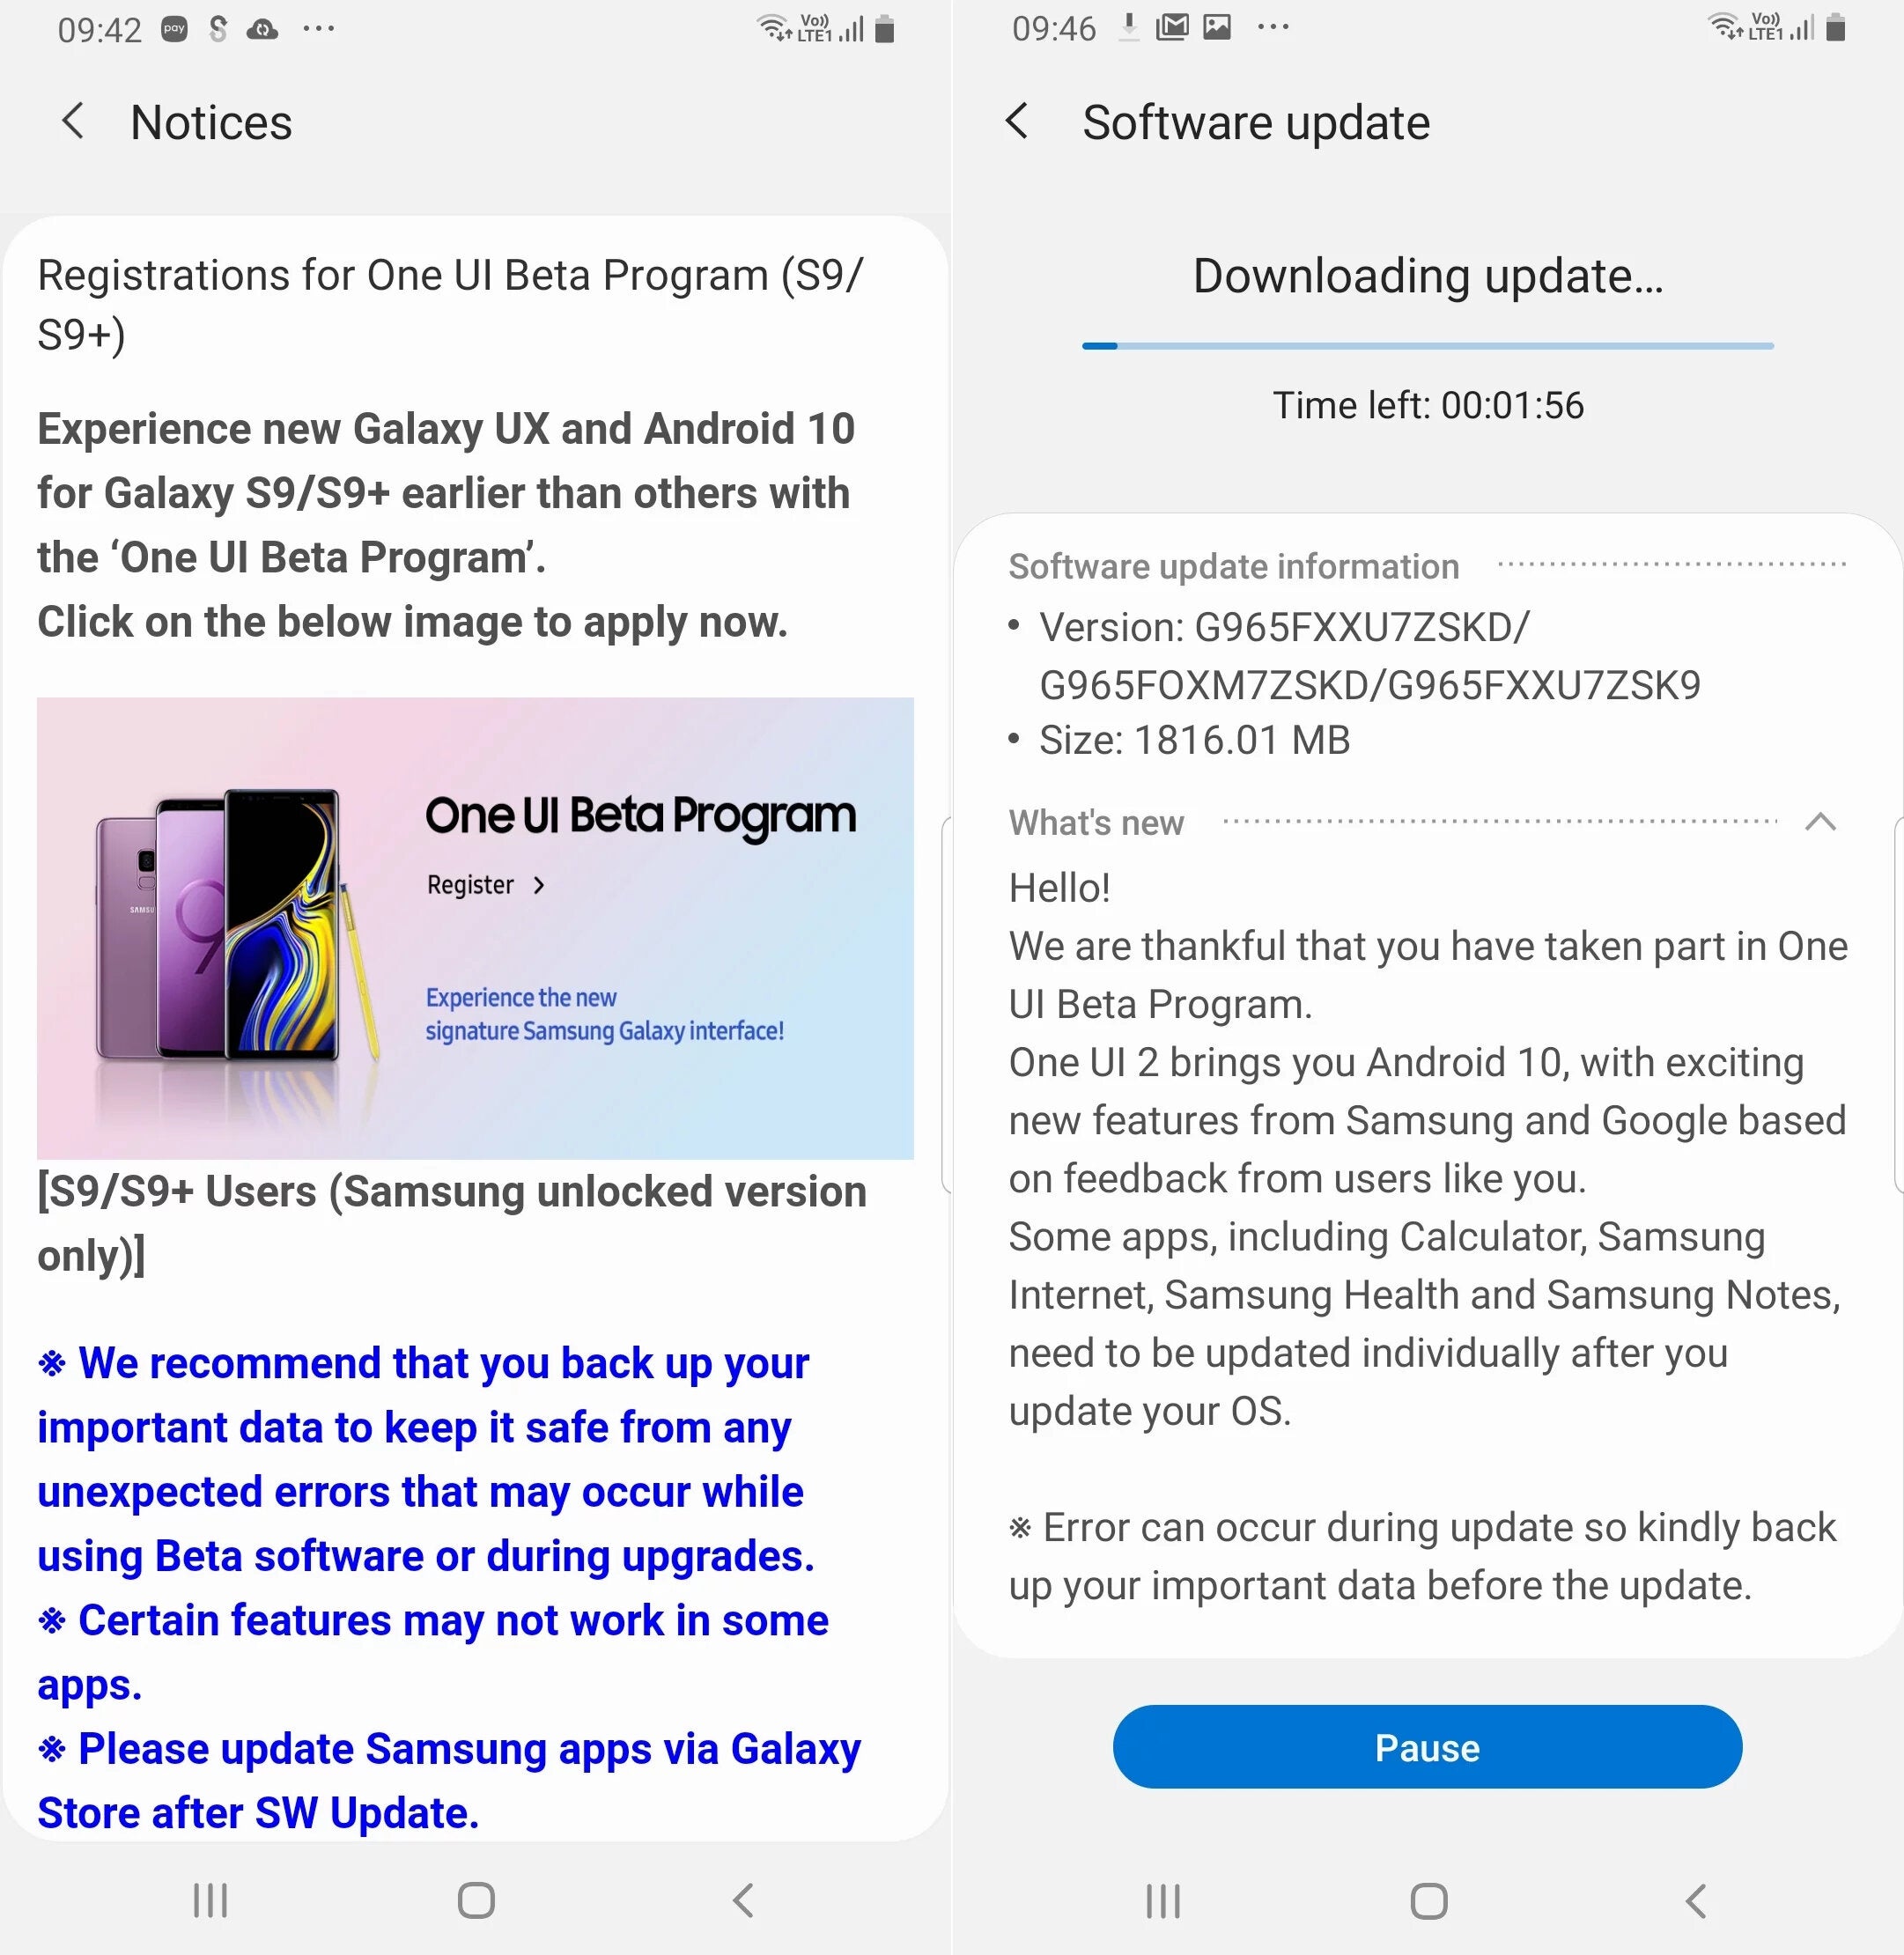 Samsung Galaxy S9/S9+ Android 10 beta commences across a few regions